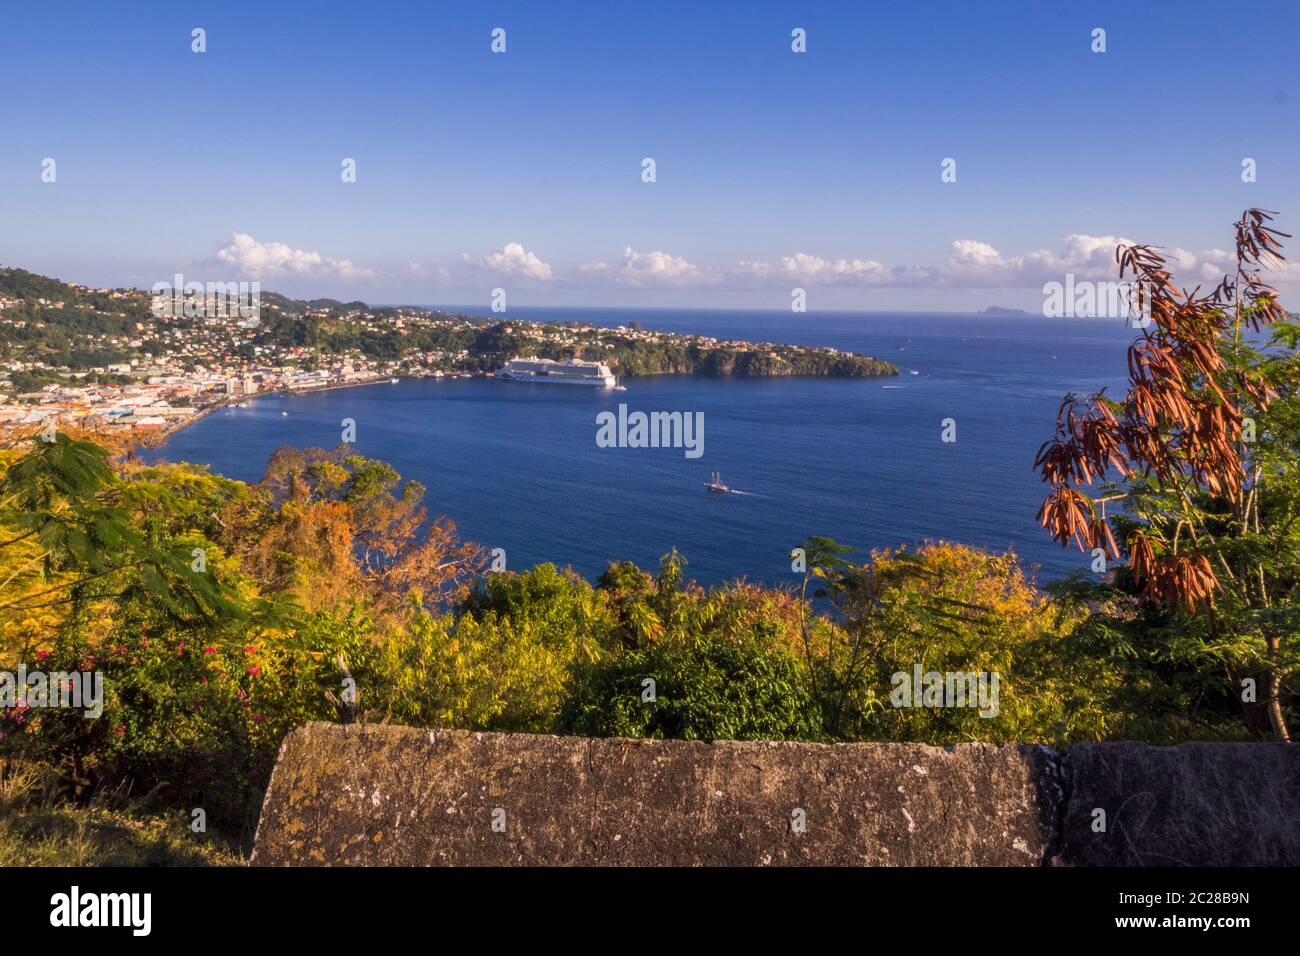 Saint Vincent and the Grenadines in the Caribbean Sea - Harbour in Kingstown Stock Photo